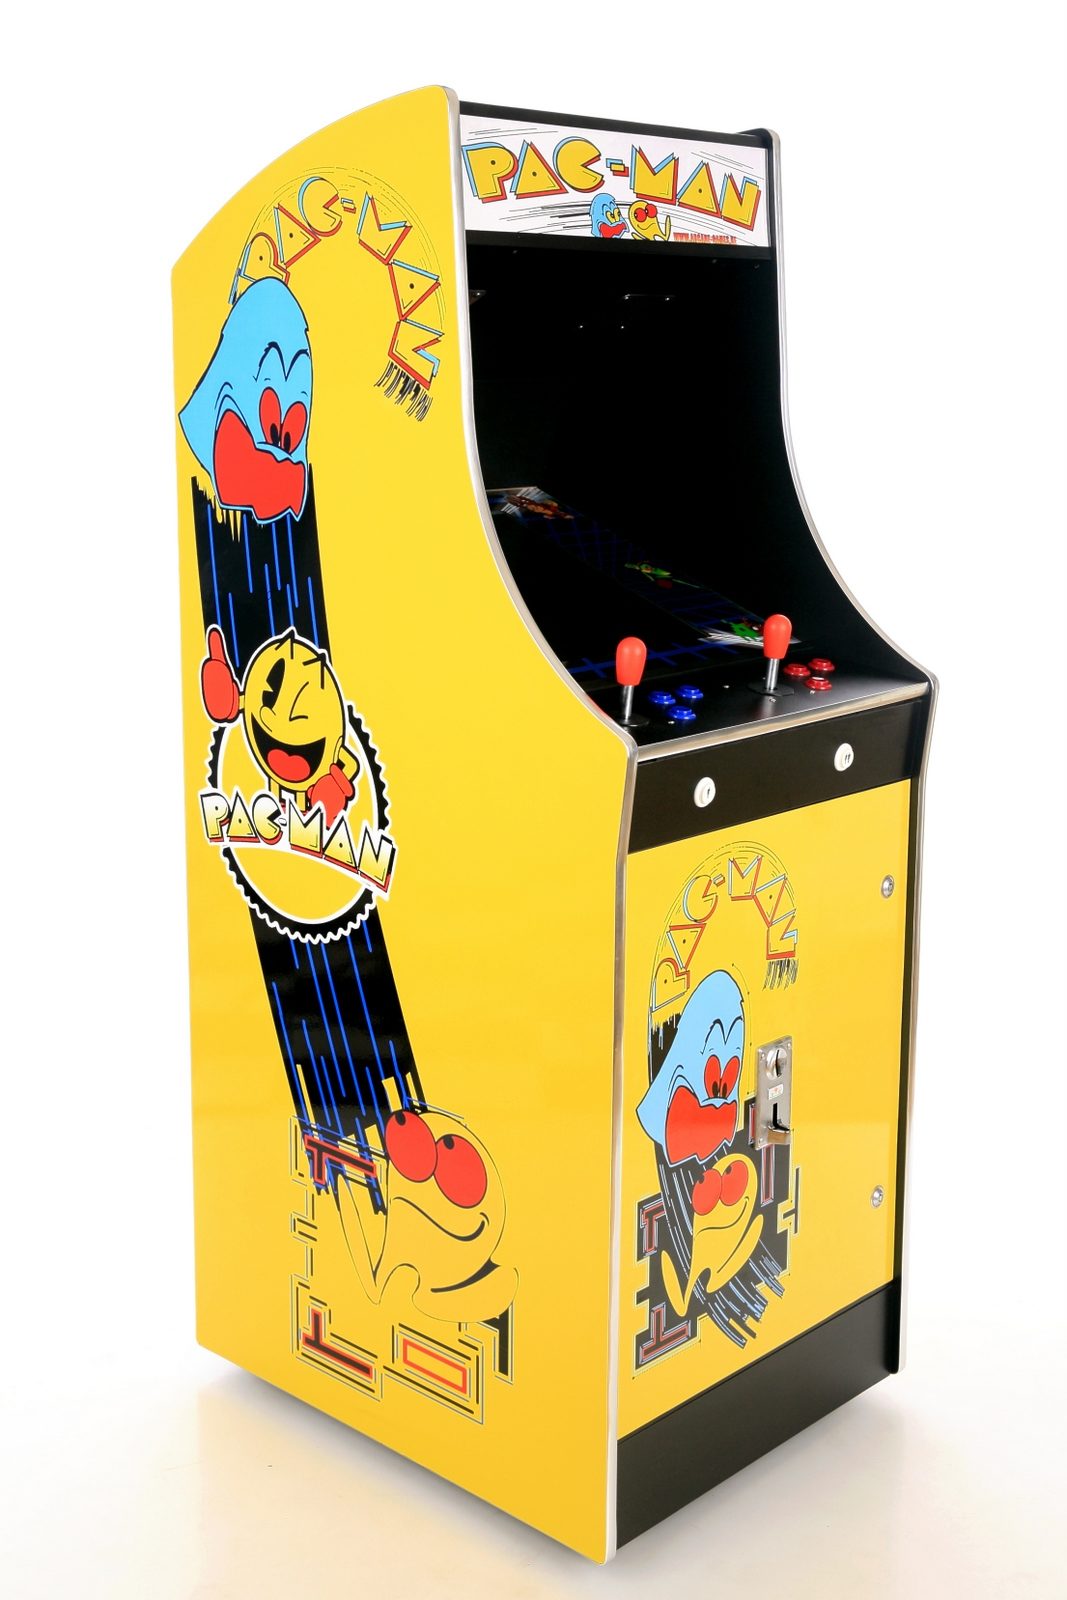 BALLY MIDWAY PACMAN MULTIJEUX